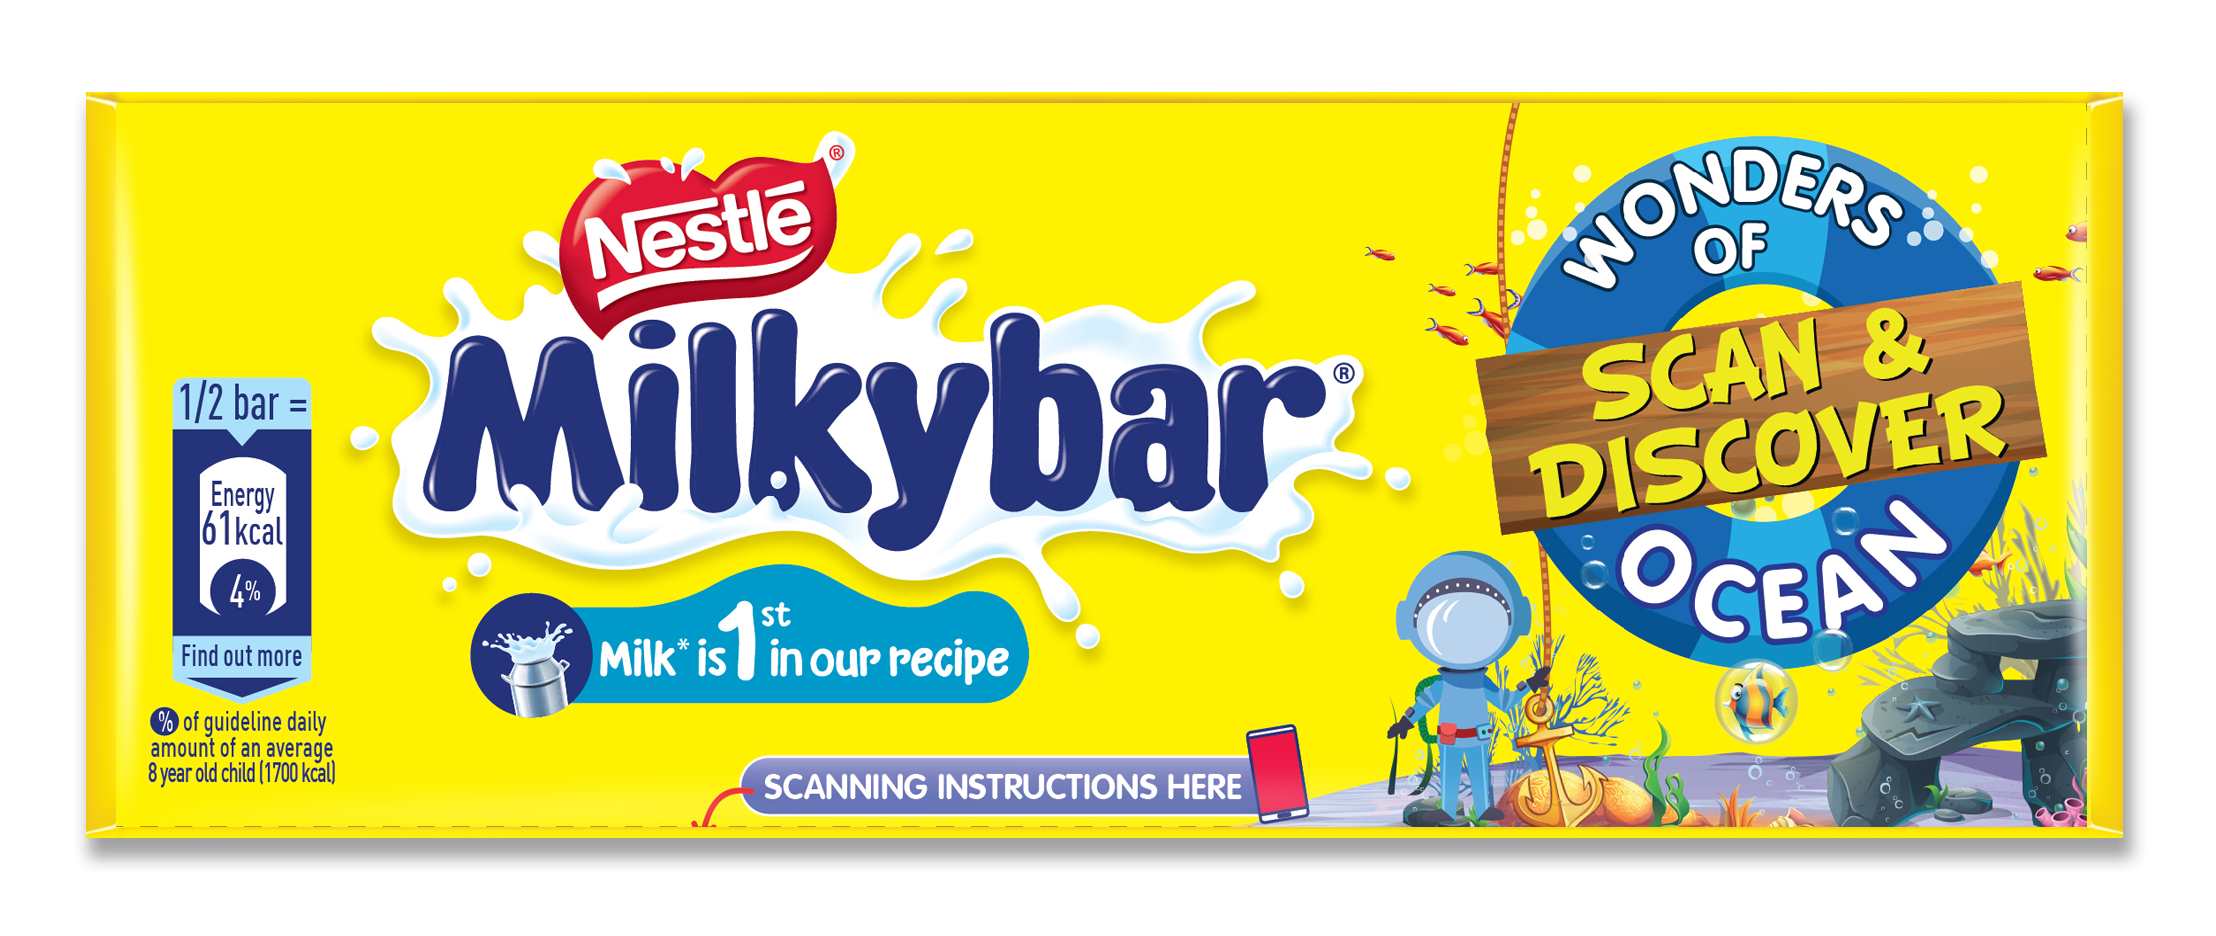 Nestlé MILKYBAR uses Immersive Augmented Reality technology to give children across India a virtual aquarium experience